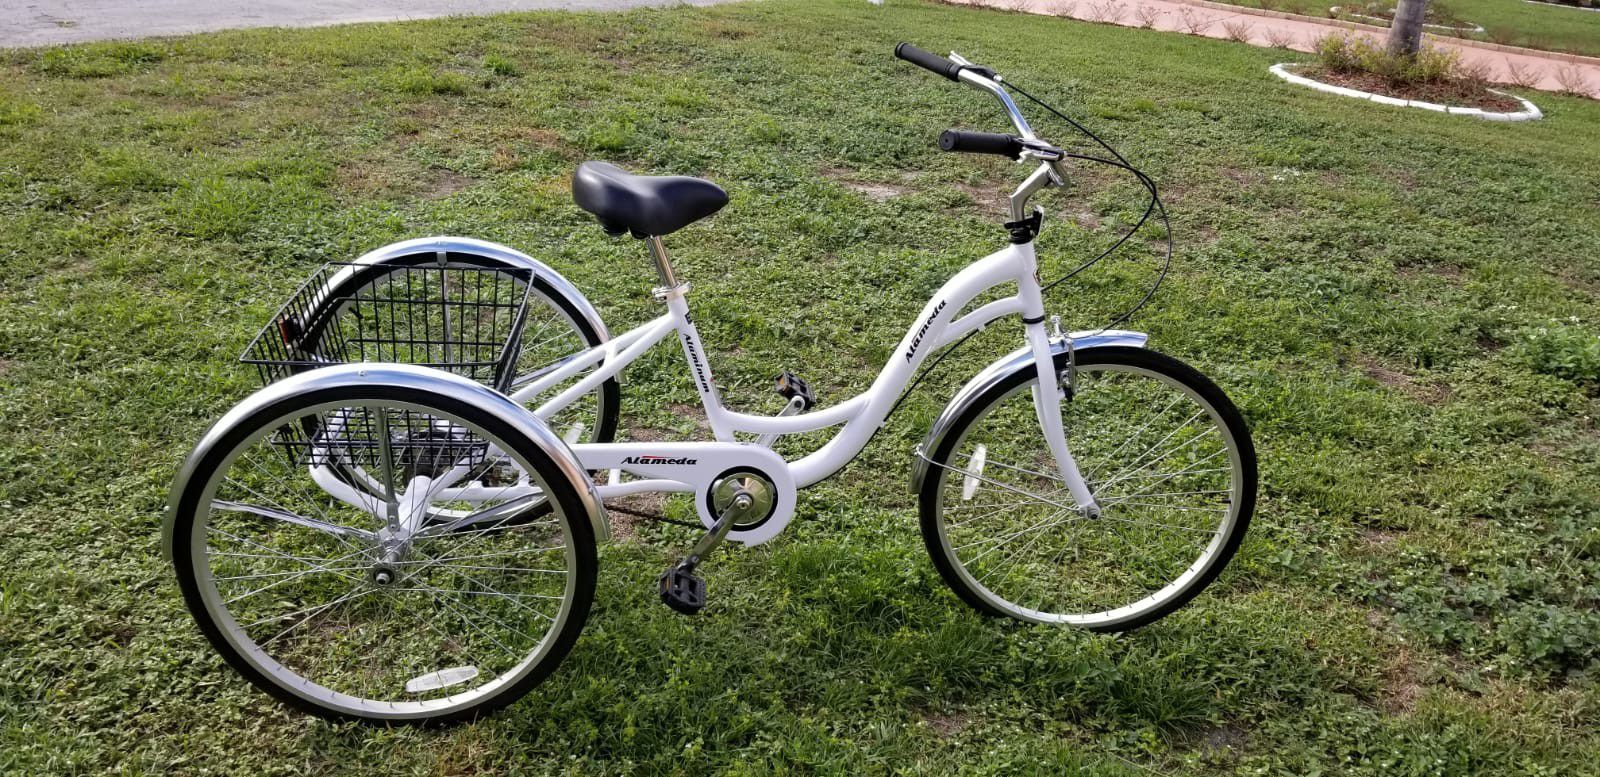 Tricycle like new